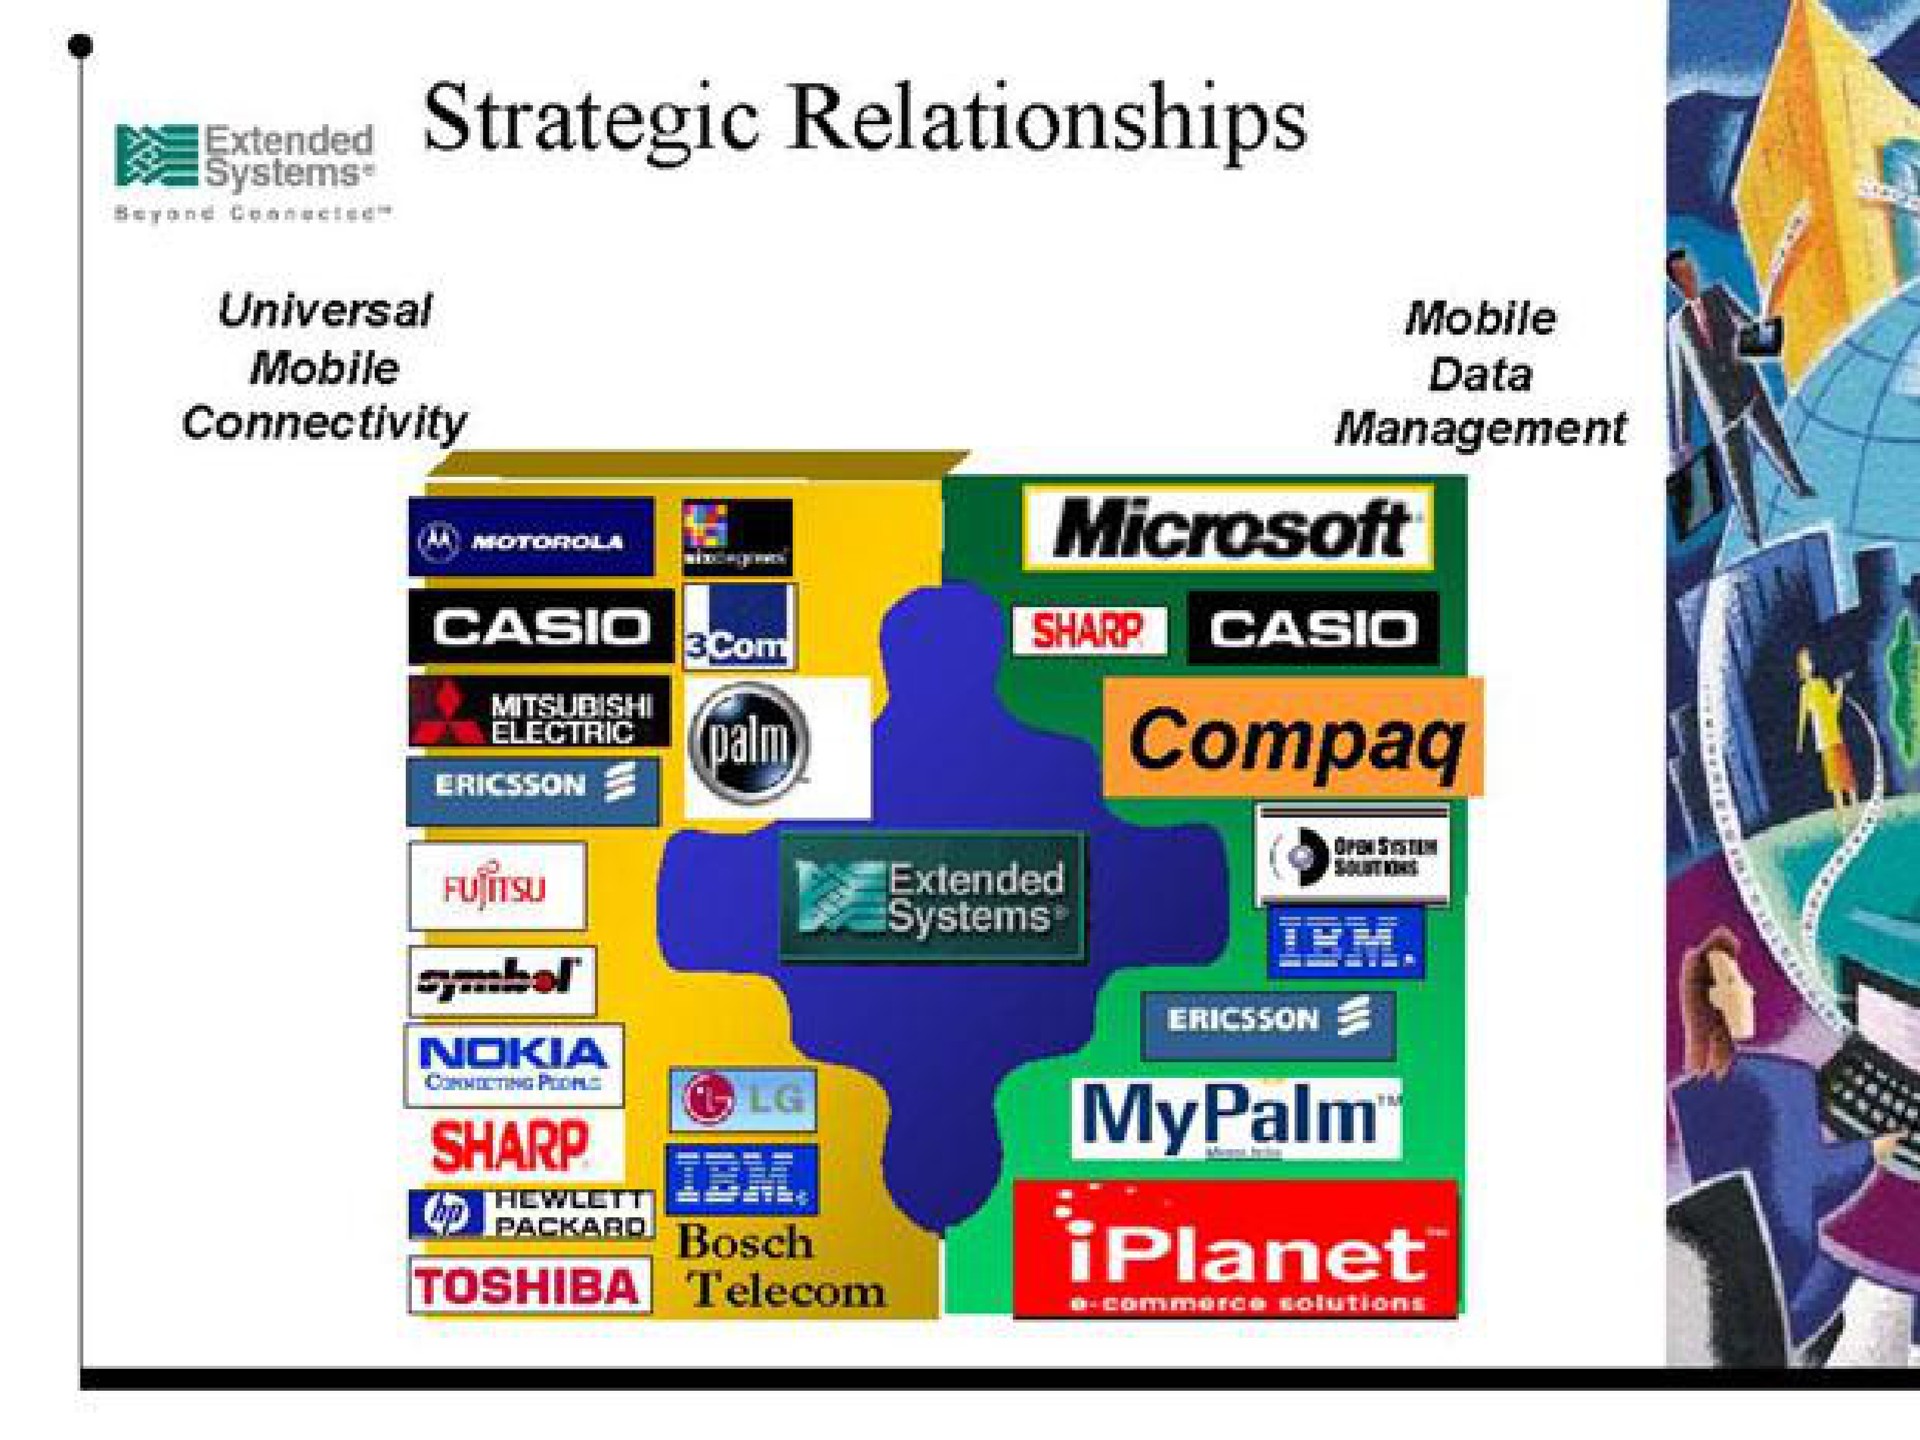 pew strategic relationships | Extended Systems